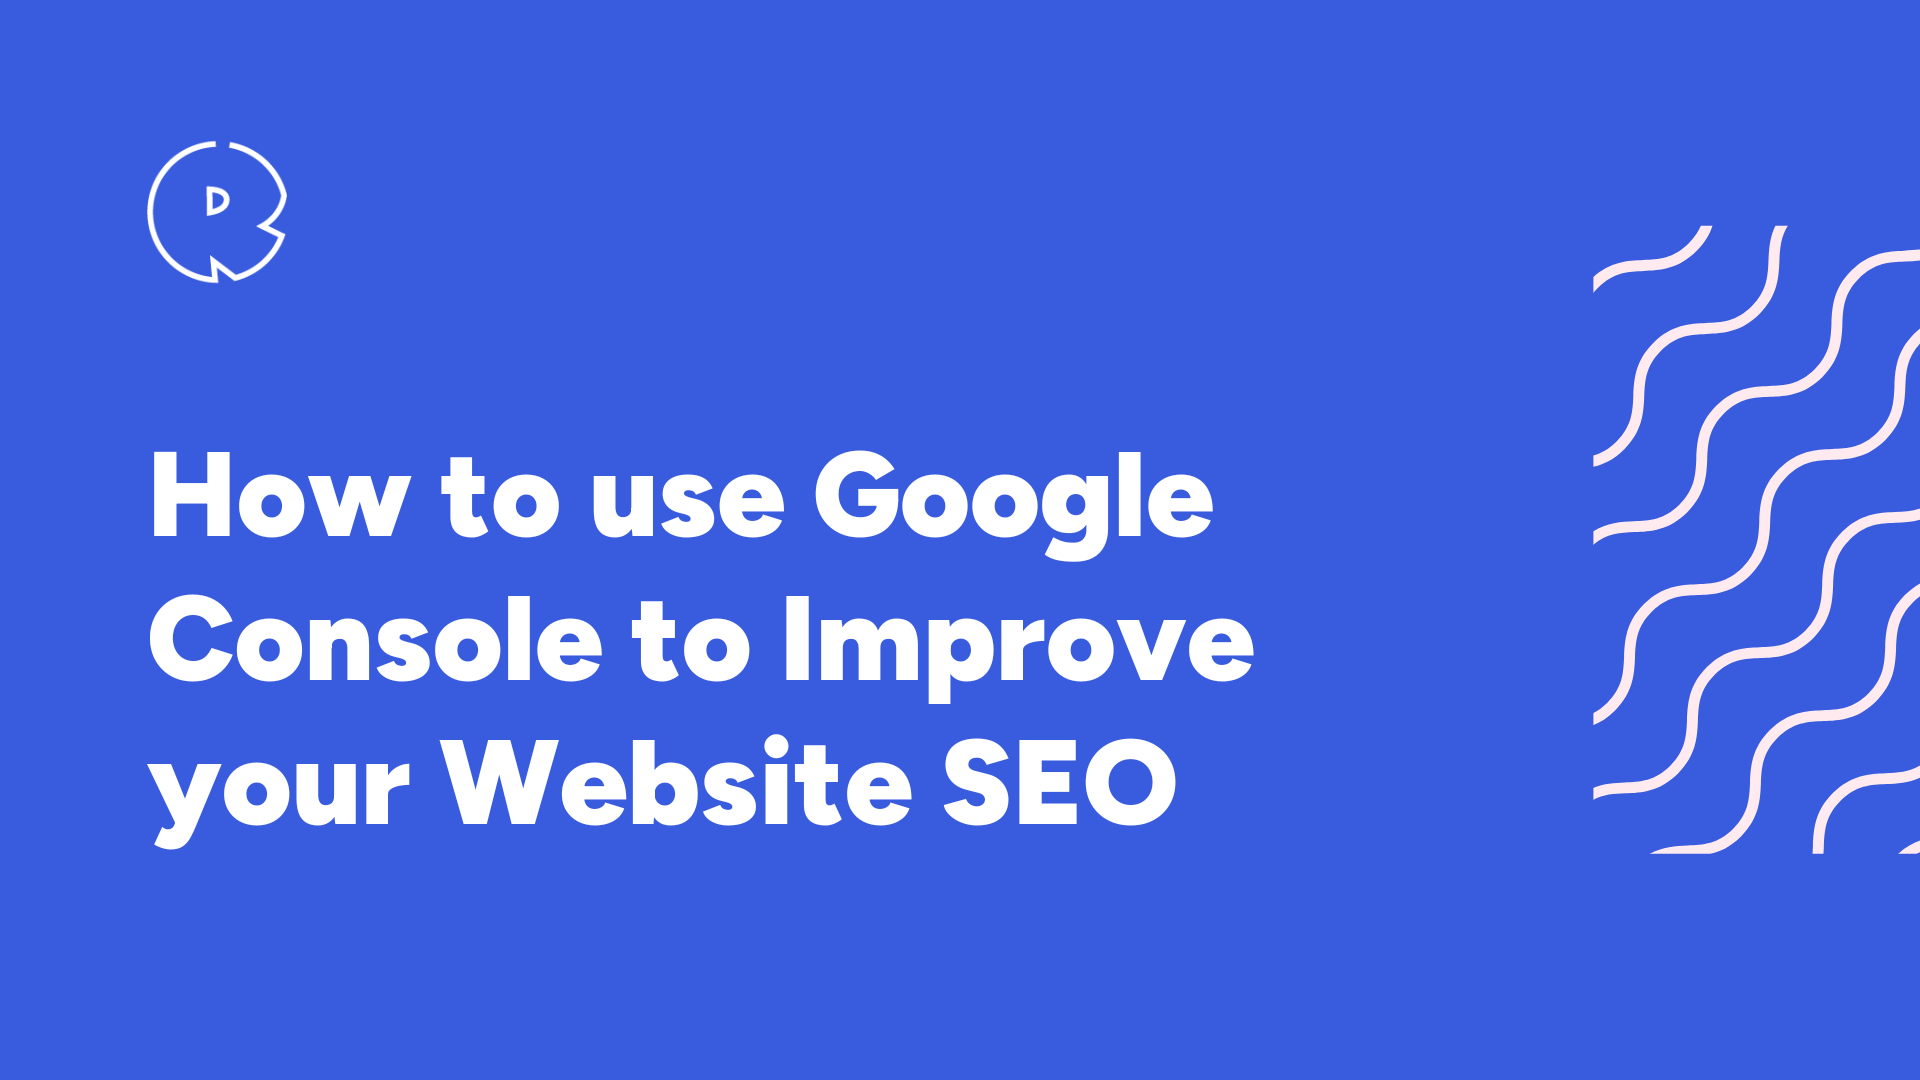 How to use Google Console to Improve your Website SEO